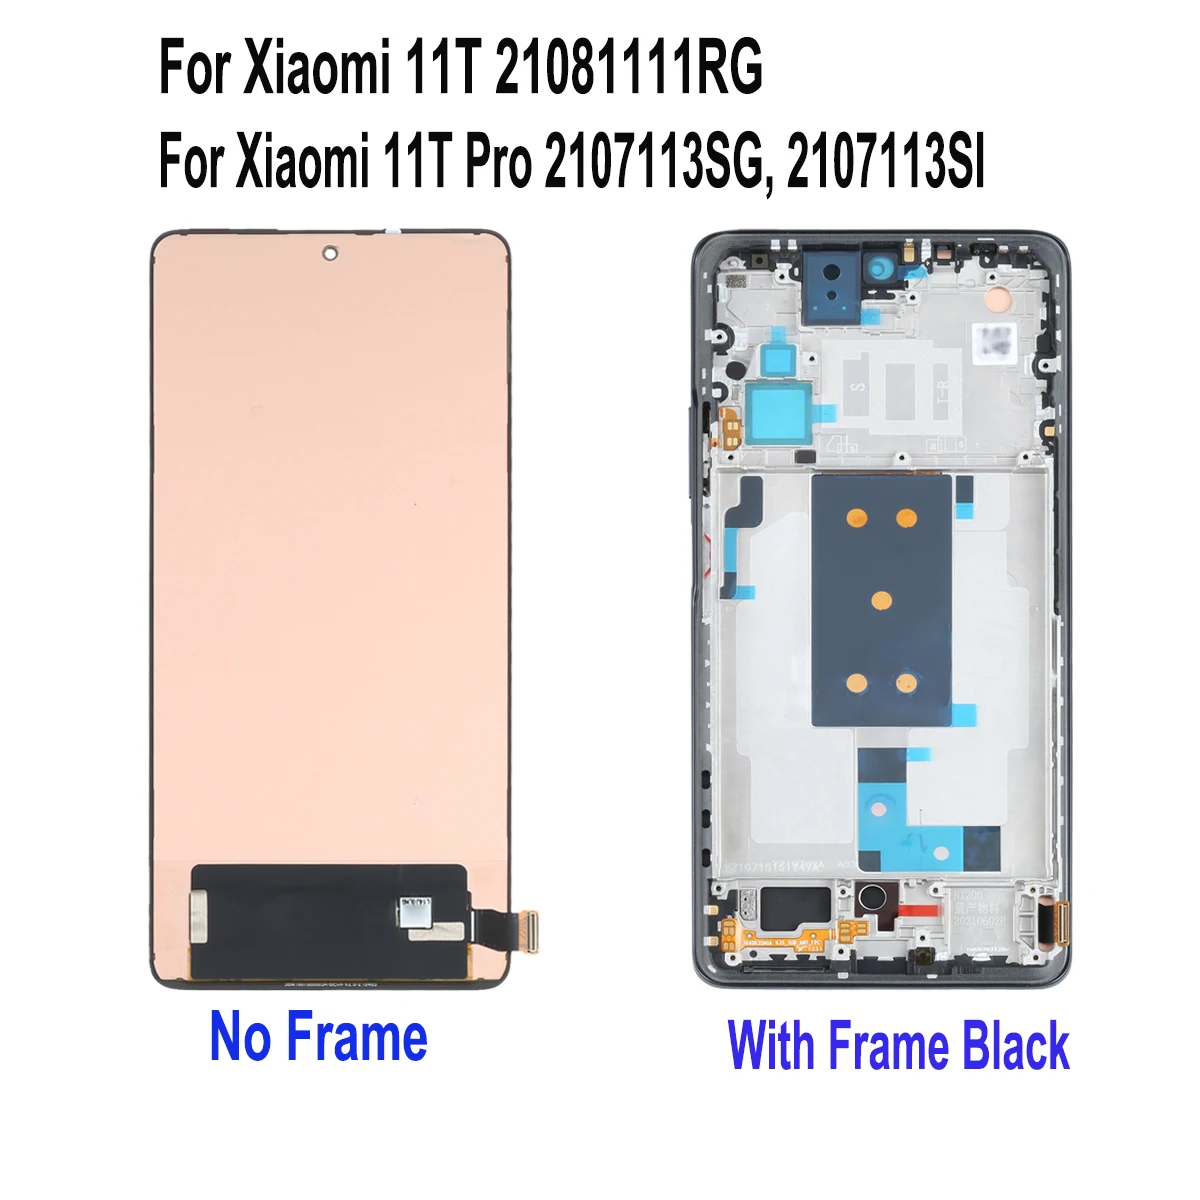 Original For Xiaomi 11T Pro 11TPro 2107113SG LCD Display Touch Screen Replacement Digitizer For Xiaomi 11T 11 T 21081111RG LCD enlarge